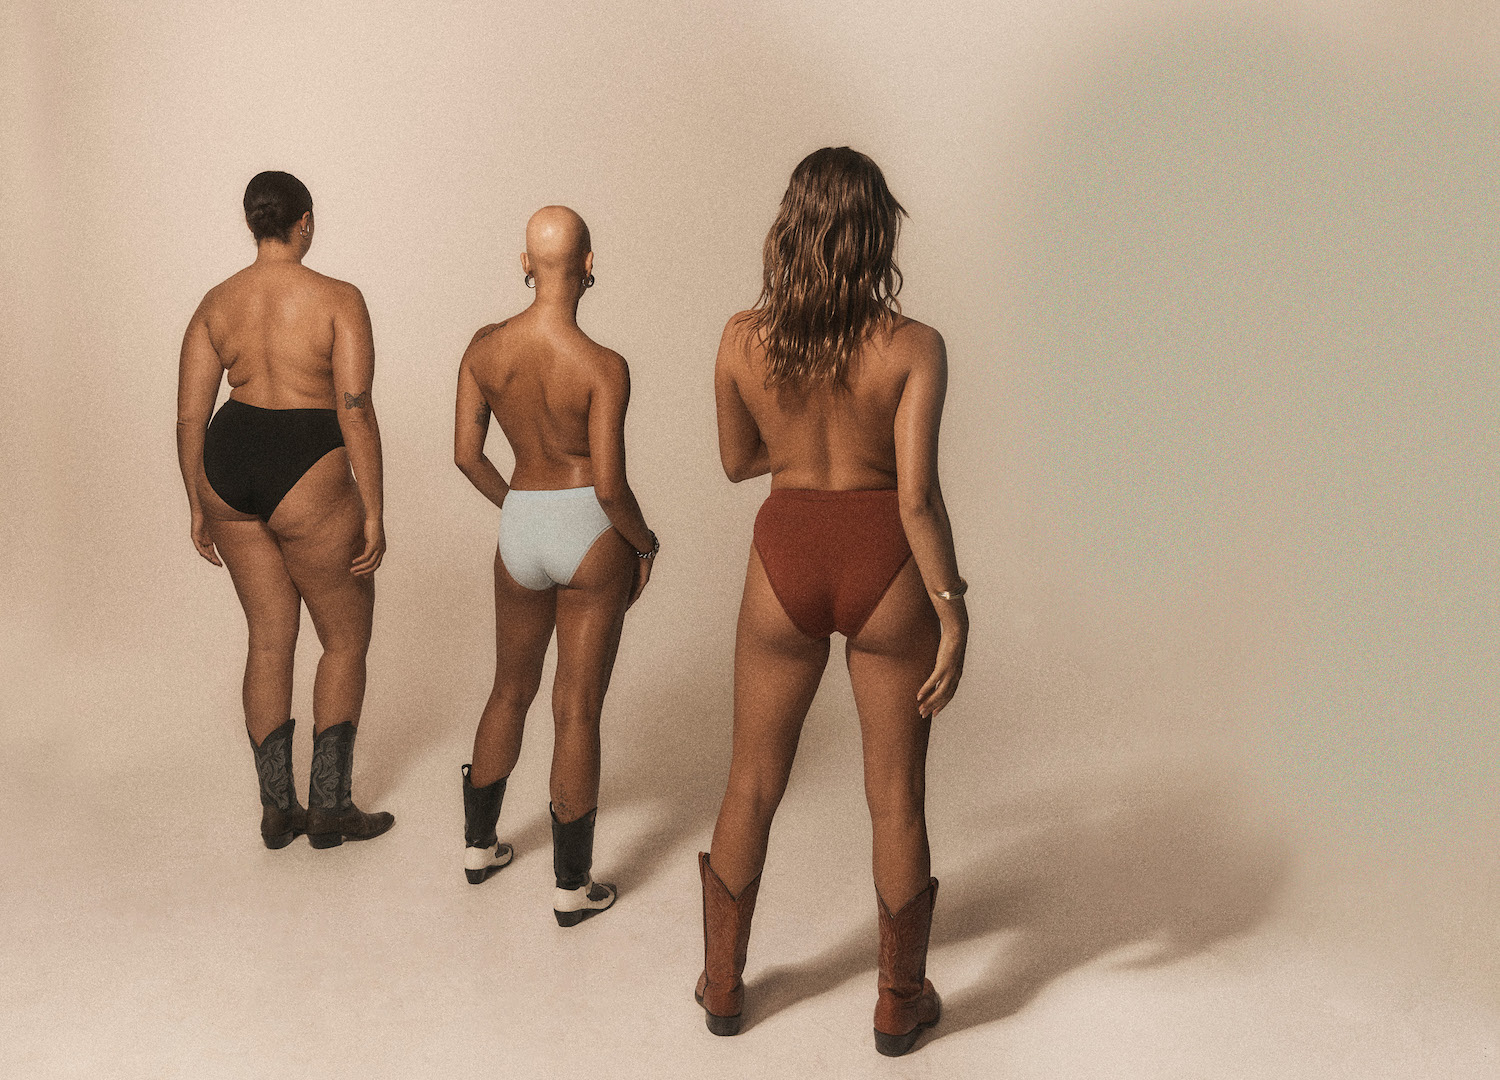 Meet Nala is the lingerie label dedicated to making inclusive undies